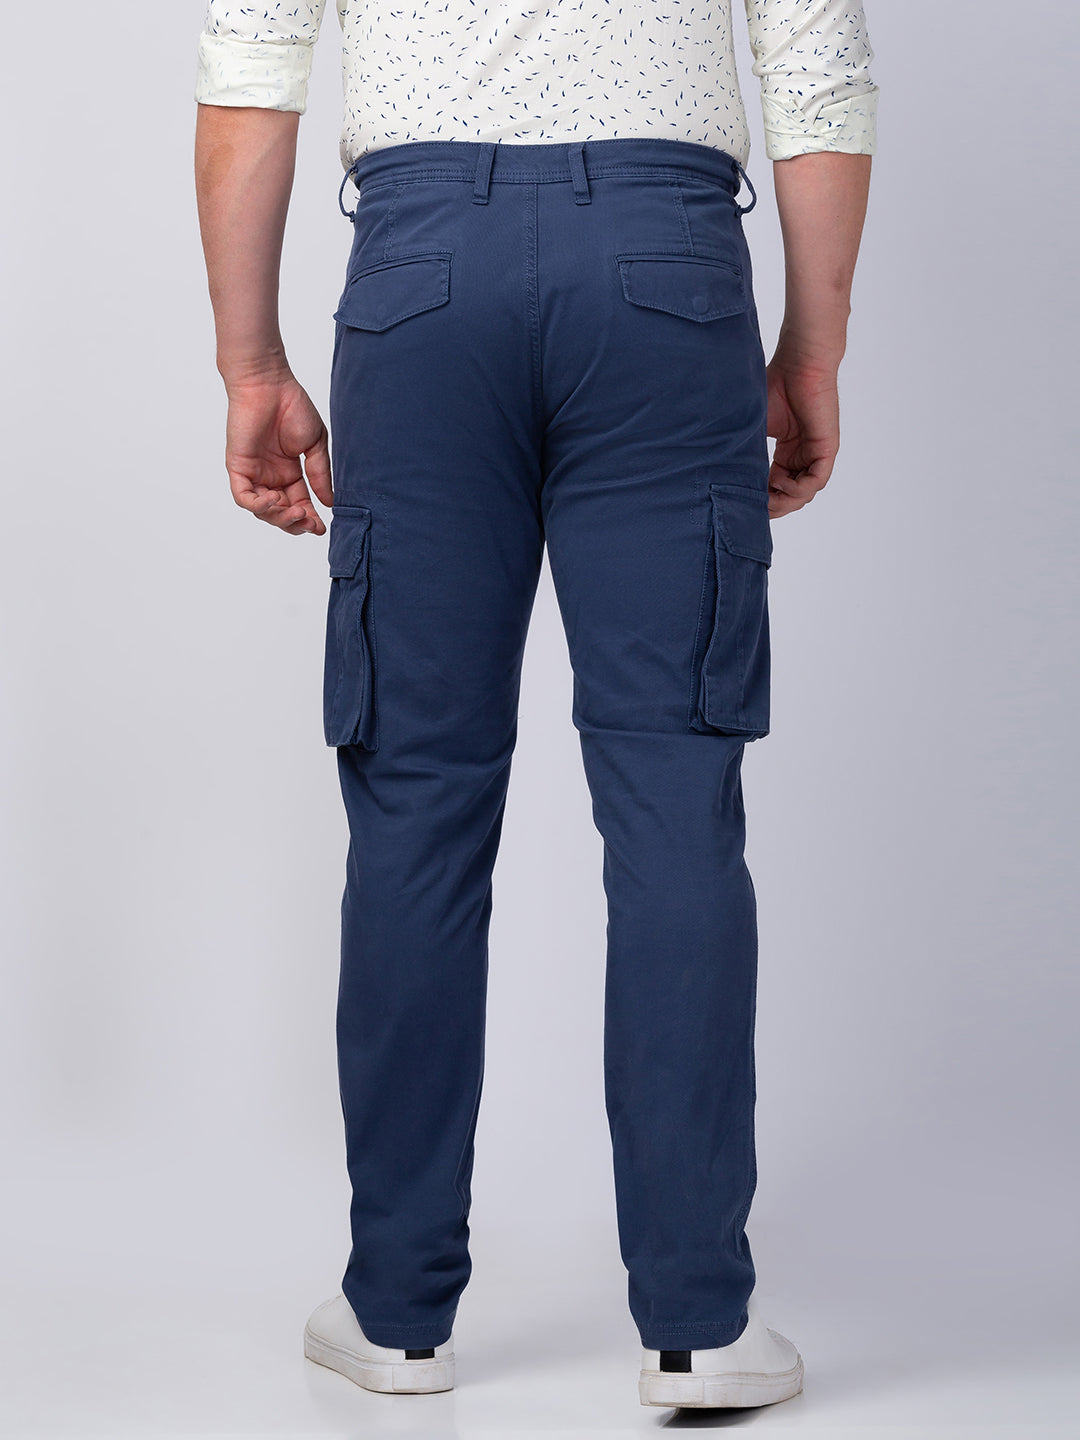 Buy Highlander Grey Relaxed Fit Ankle Length Cargo Trouser for Men Online  at Rs969  Ketch